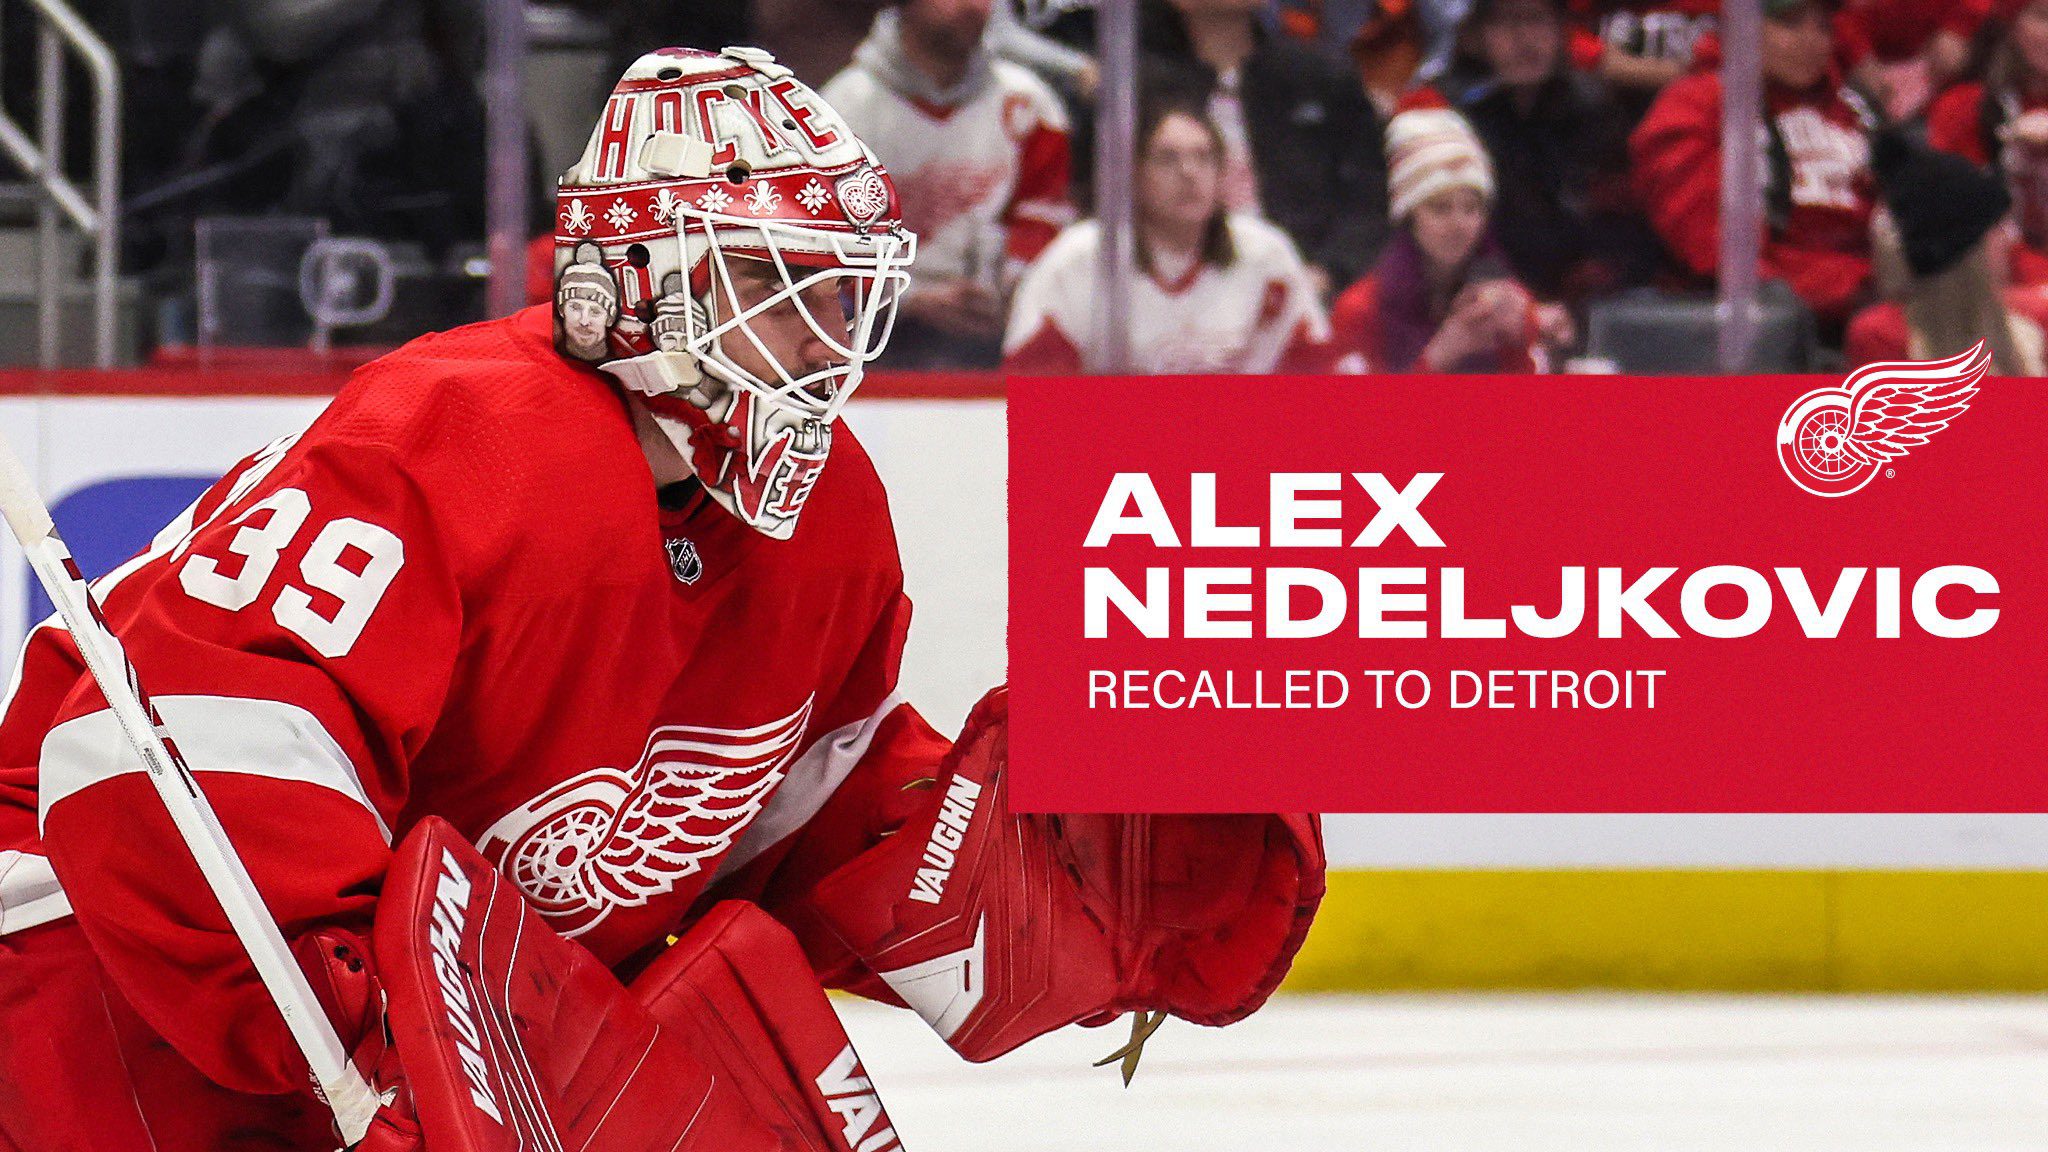 Red Wings acquire goalie Alex Nedeljkovic from Hurricanes